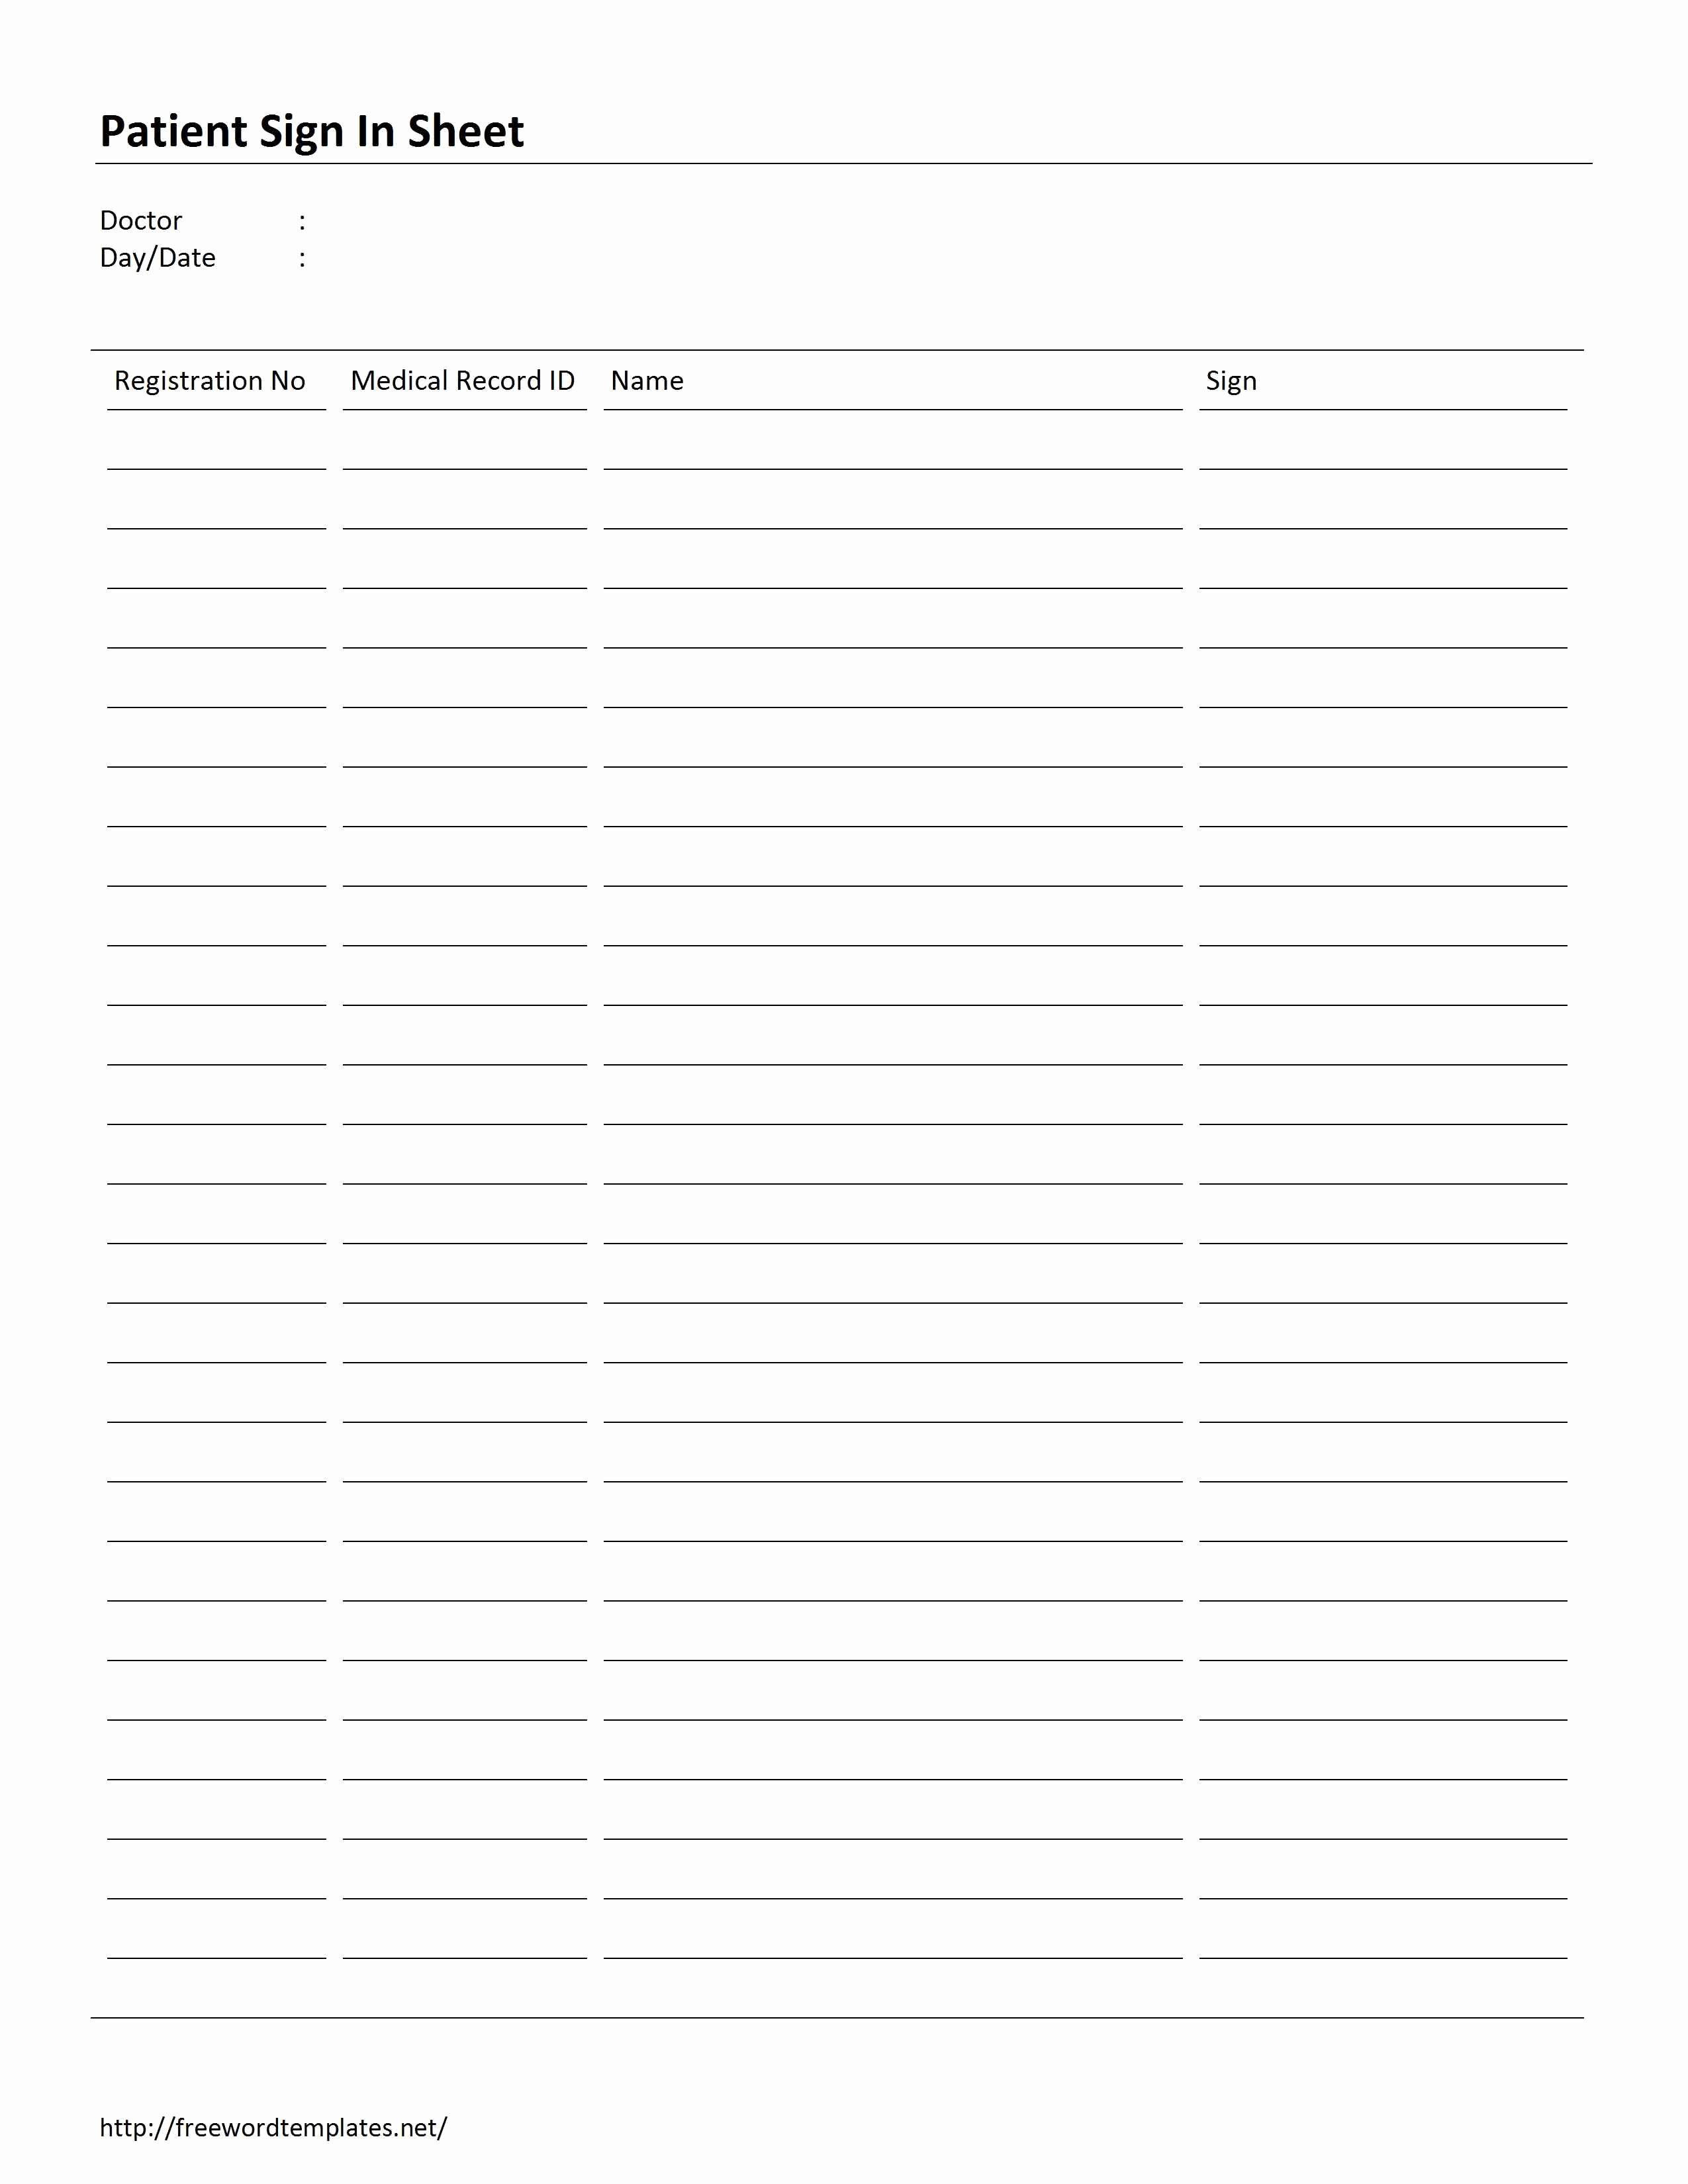 Patient Sign In Sheets Beautiful Patient Sign In Sheet Template